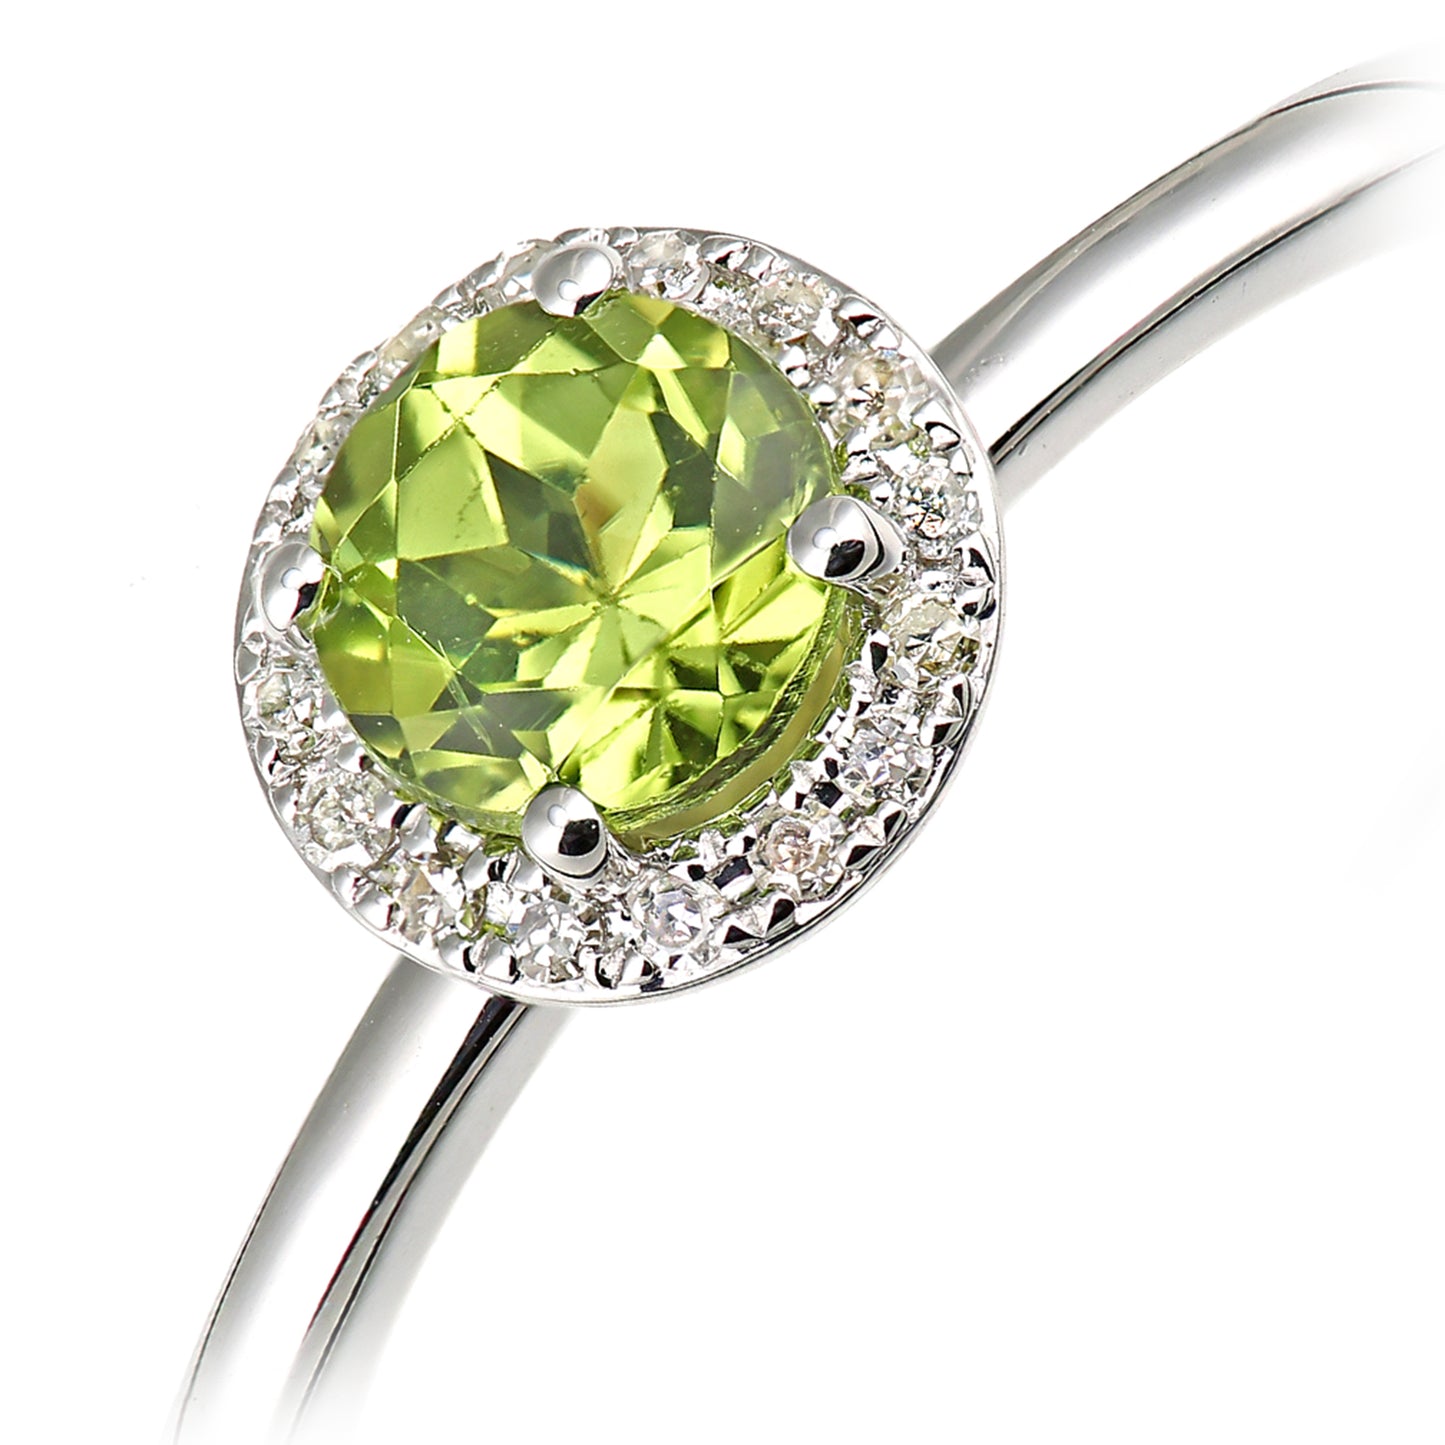 9ct White Gold  5pts Diamond 0.59ct Peridot Halo Cluster Ring - DR1AXL682WPD